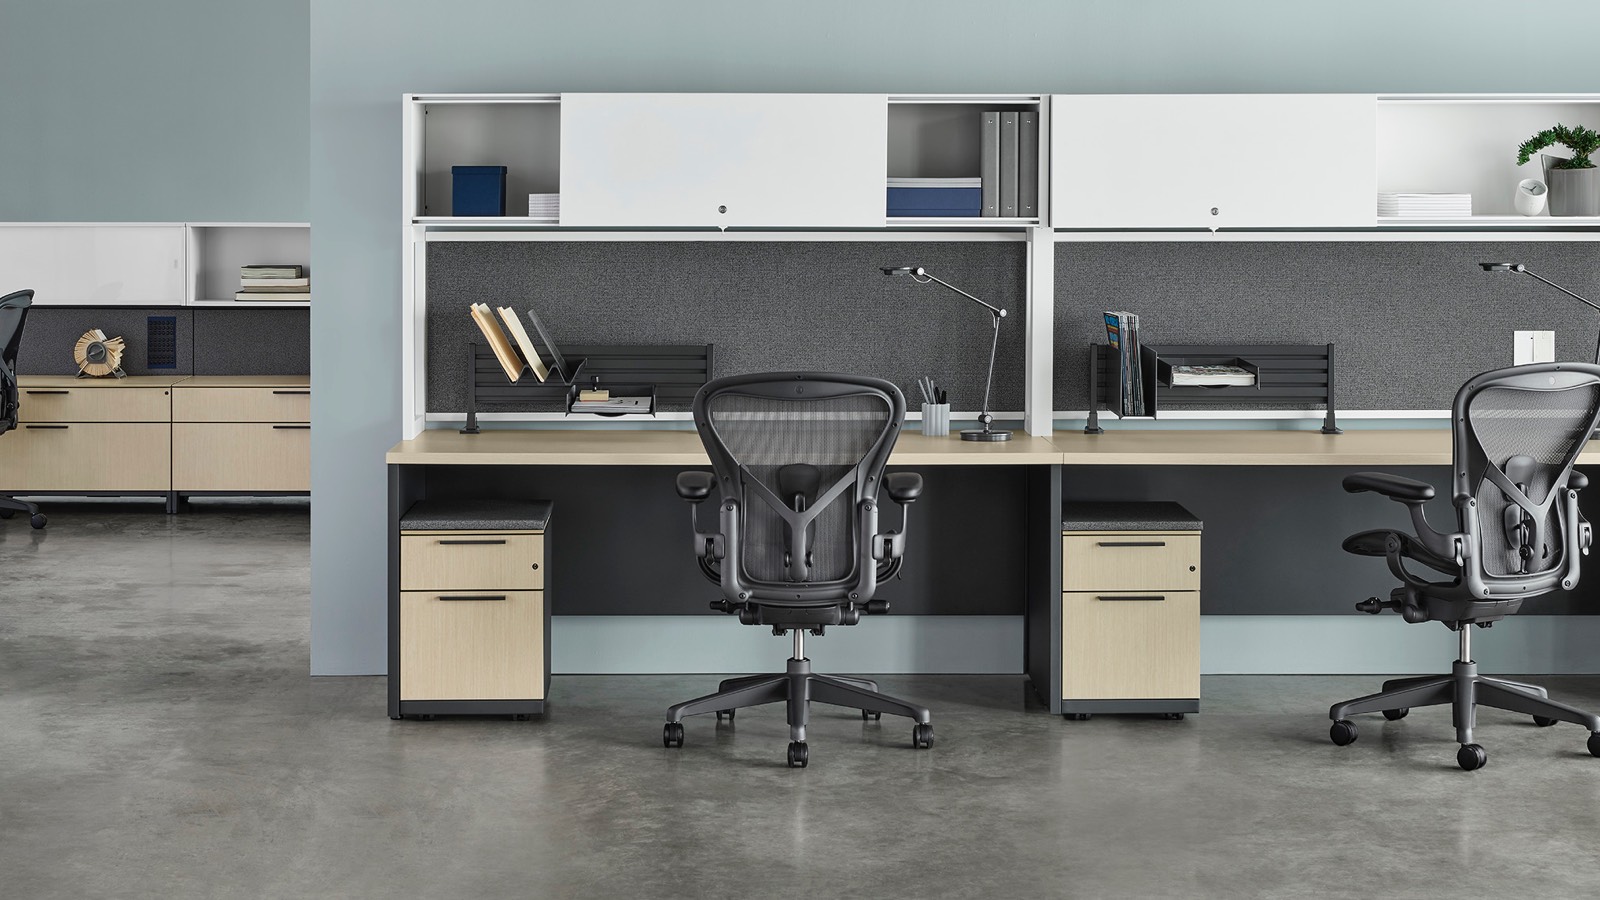 Three Canvas Metal Desks with white upper storage, gray fabric back panels, and light wood surfaces with another workstation in the background, all with dark grey Aeron chairs.